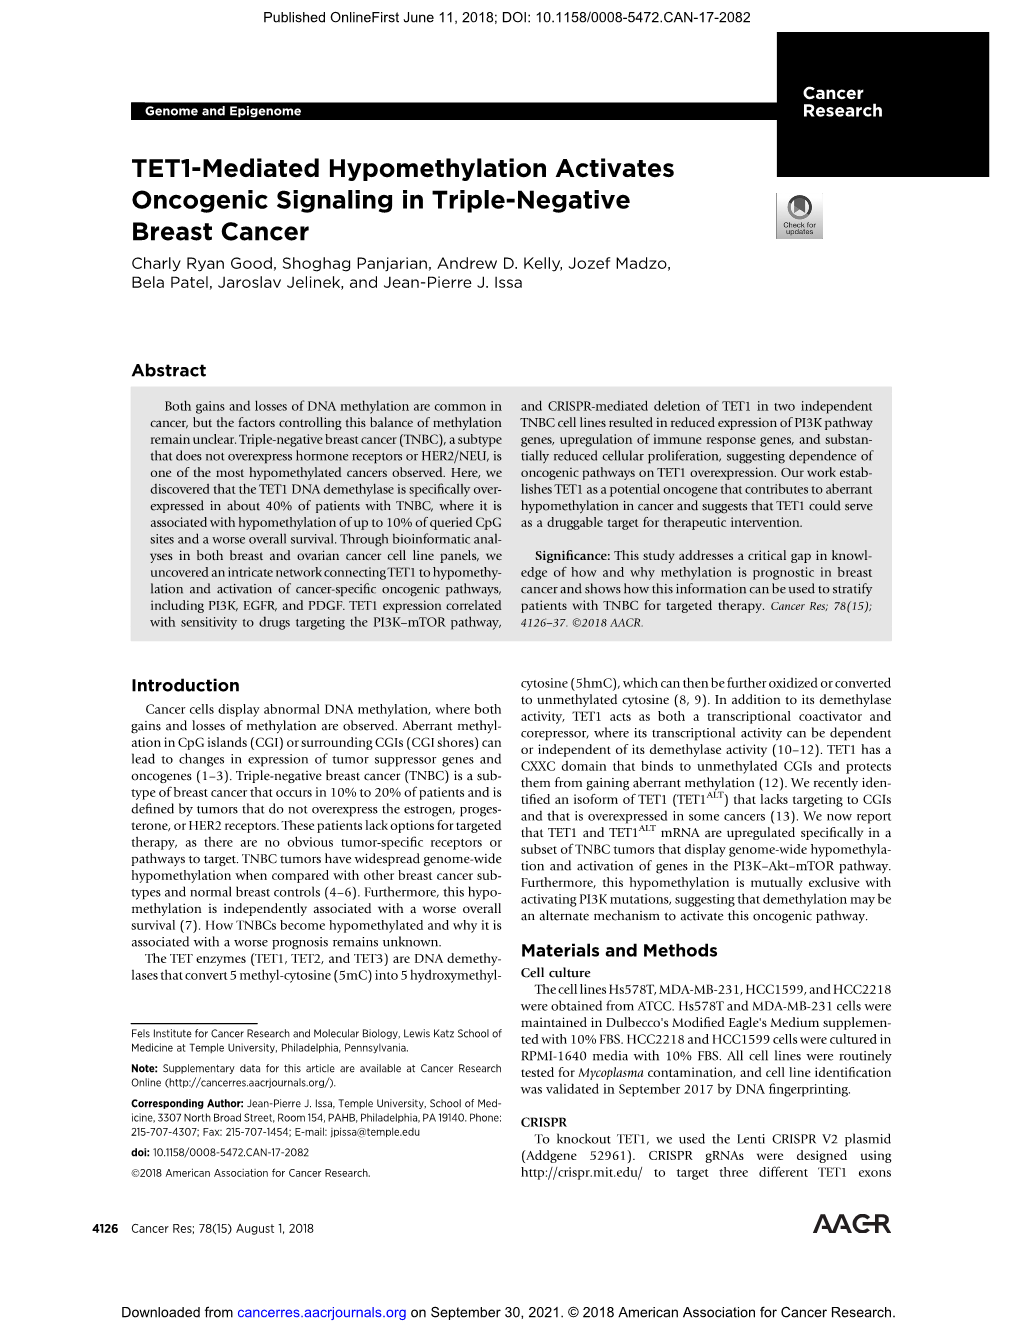 TET1-Mediated Hypomethylation Activates Oncogenic Signaling in Triple-Negative Breast Cancer Charly Ryan Good, Shoghag Panjarian, Andrew D